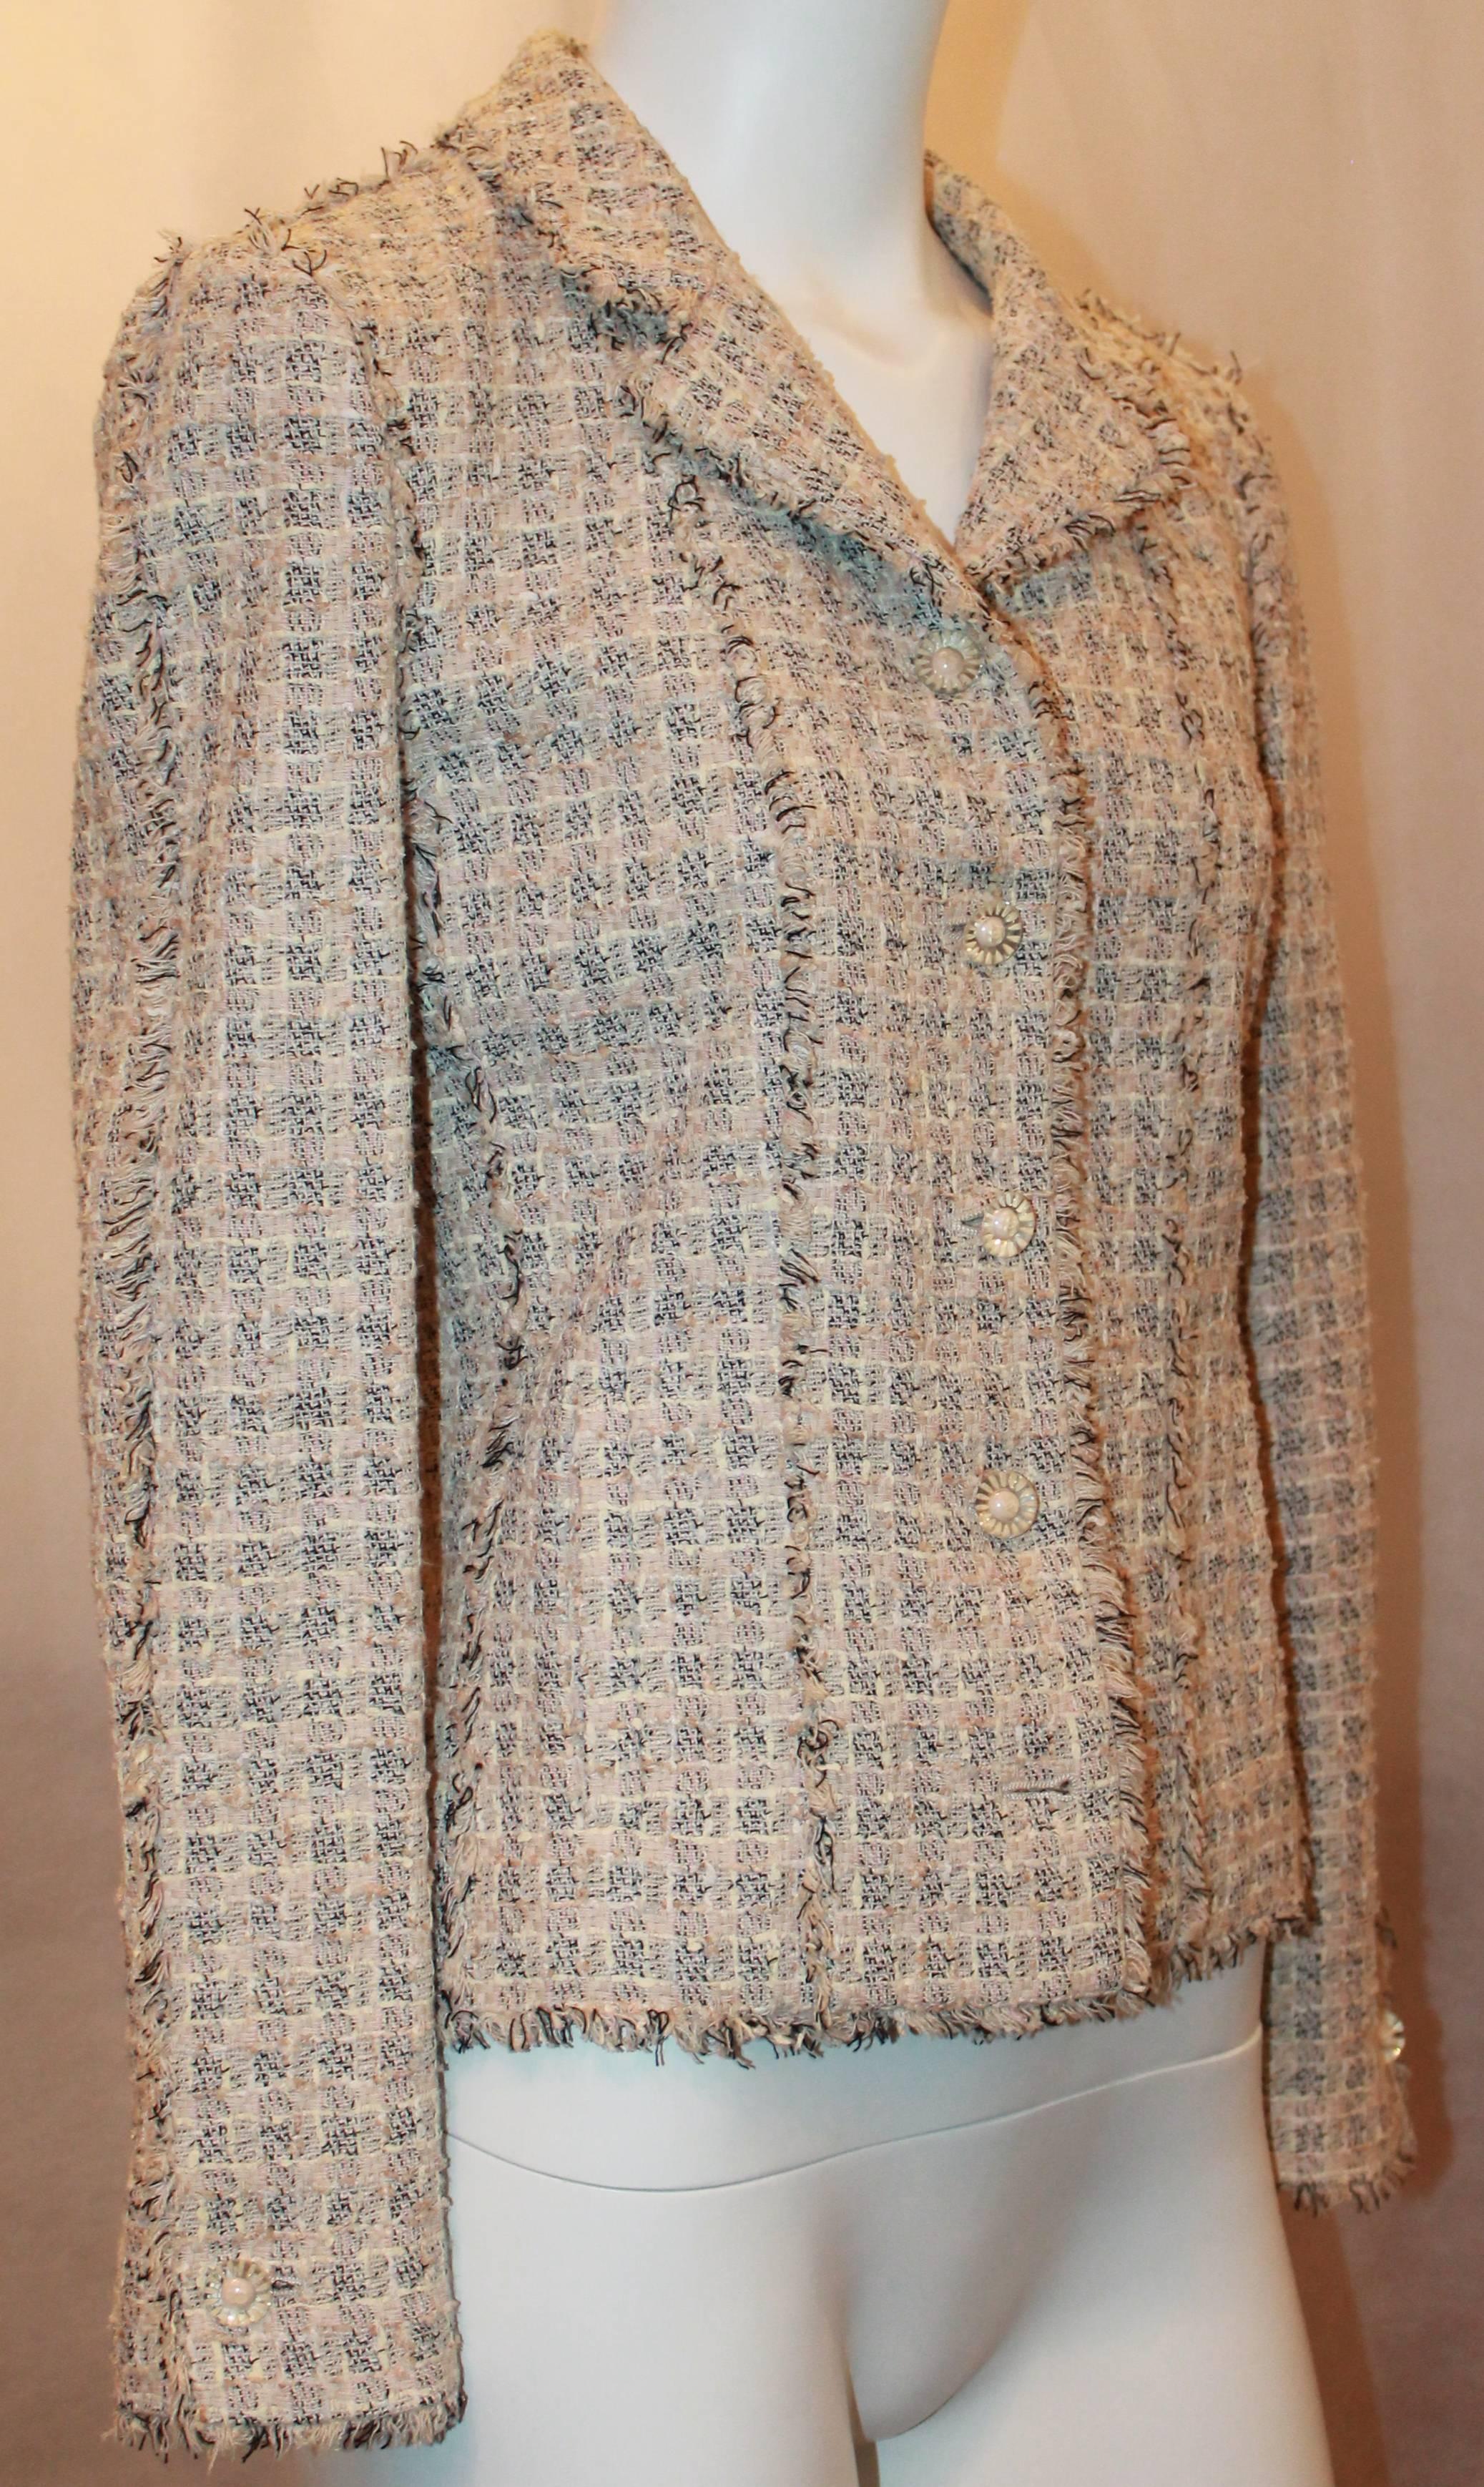 Chanel Blush, Cream, and Black Tweed Jacket w/ Fringe - 38.  This lovely Chanel jacket is in excellent condition.  It features a blush, ivory and black checkered pattern, two faux front pockets, and Lucite buttons with the 